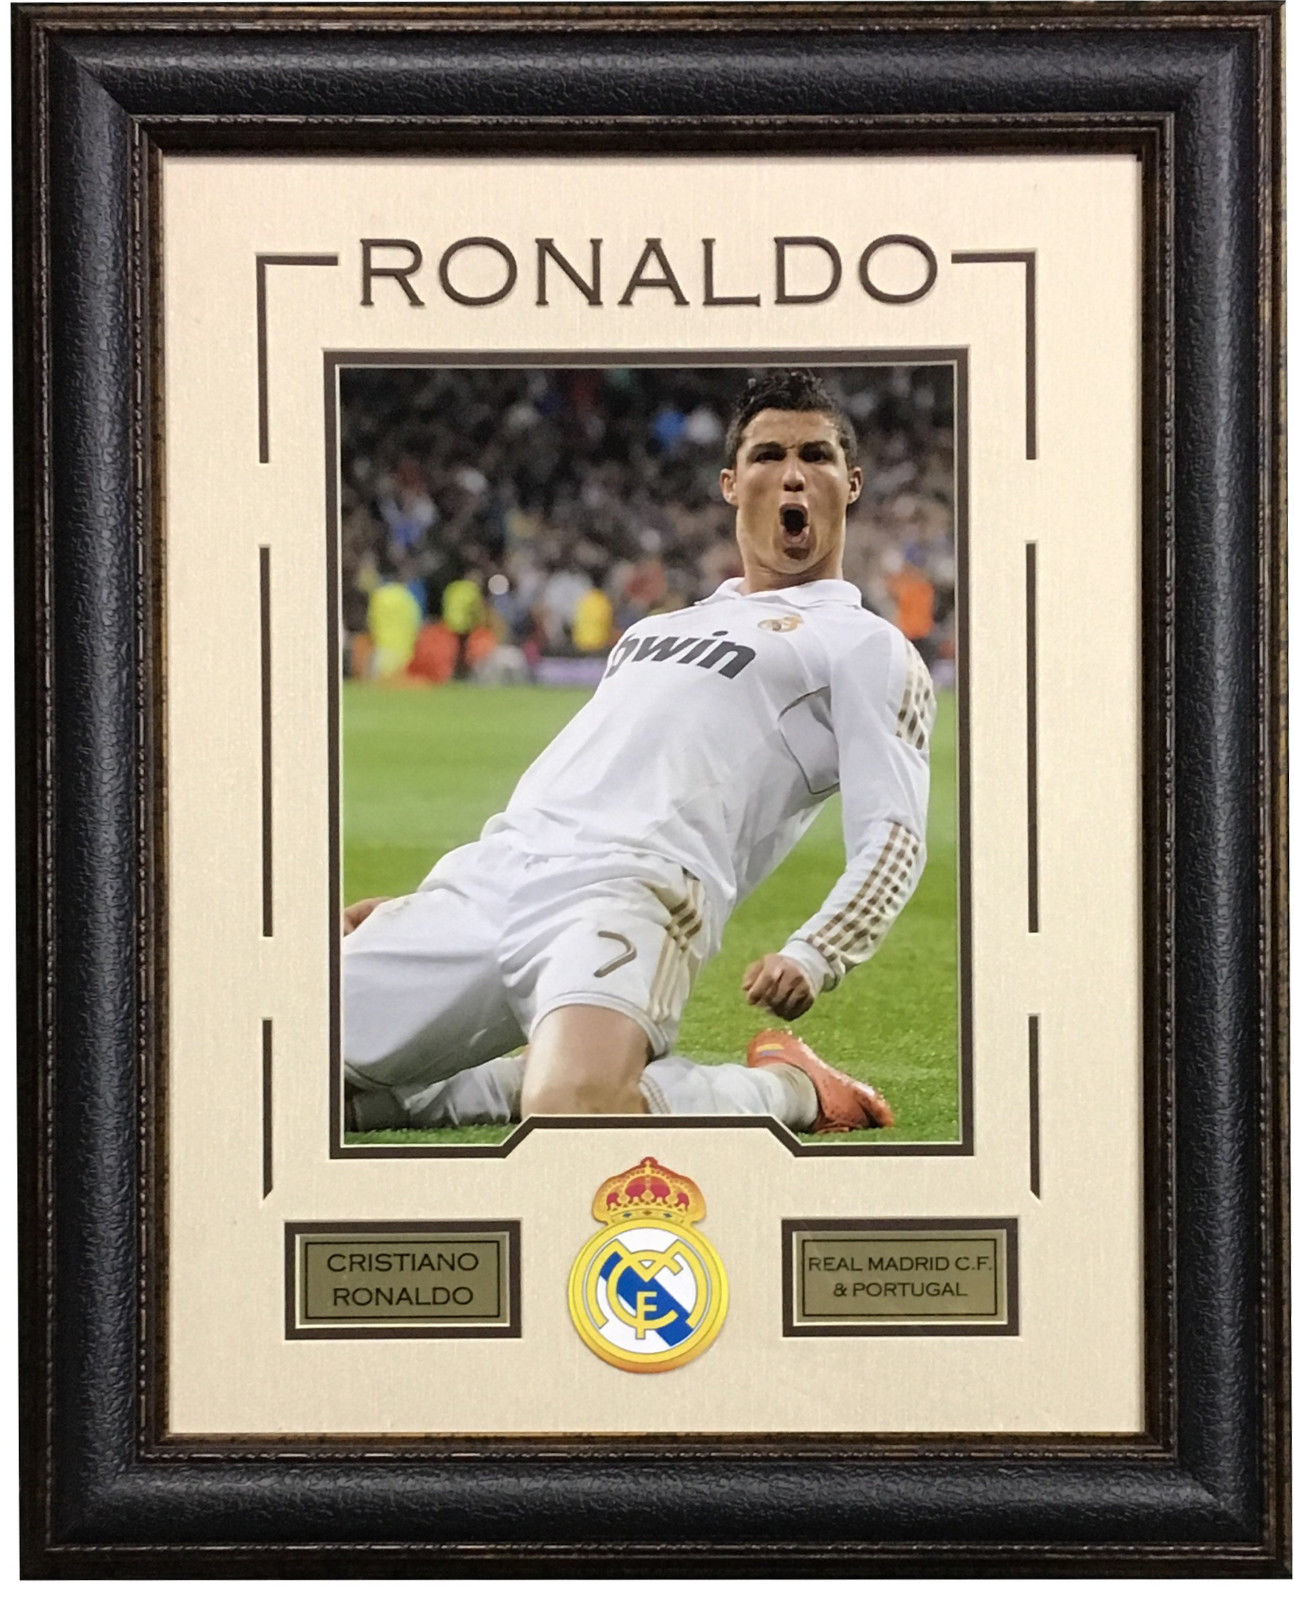 Cristiano Ronaldo Real Madrid Portugal 11×14 framed photo patch collage